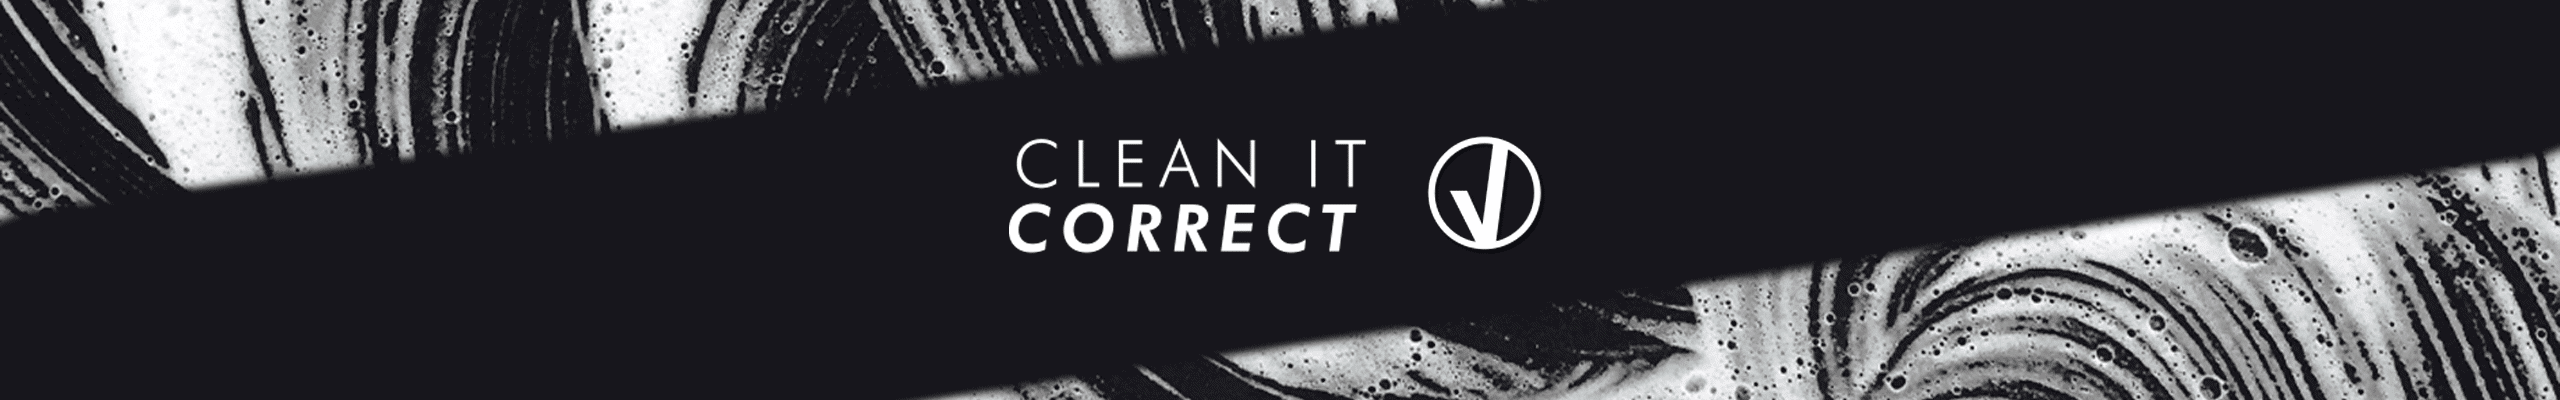 Clean It Correct Banner